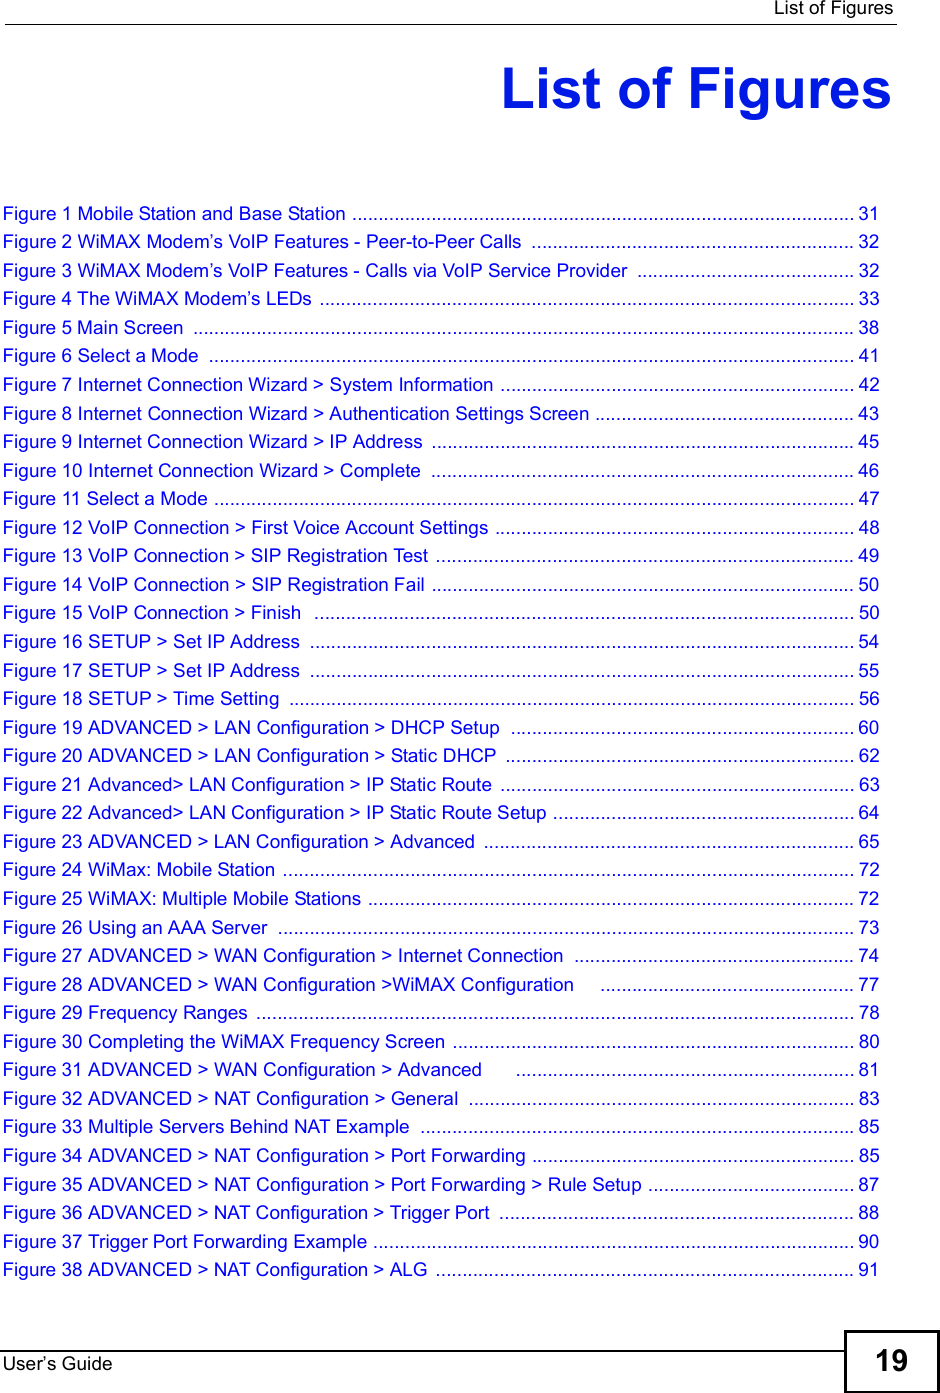  List of FiguresUser s Guide 19List of FiguresFigure 1 Mobile Station and Base Station ...............................................................................................31Figure 2 WiMAX Modem s VoIP Features - Peer-to-Peer Calls .............................................................32Figure 3 WiMAX Modem s VoIP Features - Calls via VoIP Service Provider .........................................32Figure 4 The WiMAX Modem s LEDs .....................................................................................................33Figure 5 Main Screen .............................................................................................................................38Figure 6 Select a Mode ..........................................................................................................................41Figure 7 Internet Connection Wizard &gt; System Information ...................................................................42Figure 8 Internet Connection Wizard &gt; Authentication Settings Screen .................................................43Figure 9 Internet Connection Wizard &gt; IP Address ................................................................................45Figure 10 Internet Connection Wizard &gt; Complete ................................................................................46Figure 11 Select a Mode .........................................................................................................................47Figure 12 VoIP Connection &gt; First Voice Account Settings ....................................................................48Figure 13 VoIP Connection &gt; SIP Registration Test ...............................................................................49Figure 14 VoIP Connection &gt; SIP Registration Fail ................................................................................50Figure 15 VoIP Connection &gt; Finish  ......................................................................................................50Figure 16 SETUP &gt; Set IP Address .......................................................................................................54Figure 17 SETUP &gt; Set IP Address .......................................................................................................55Figure 18 SETUP &gt; Time Setting ...........................................................................................................56Figure 19 ADVANCED &gt; LAN Configuration &gt; DHCP Setup .................................................................60Figure 20 ADVANCED &gt; LAN Configuration &gt; Static DHCP ..................................................................62Figure 21 Advanced&gt; LAN Configuration &gt; IP Static Route ...................................................................63Figure 22 Advanced&gt; LAN Configuration &gt; IP Static Route Setup .........................................................64Figure 23 ADVANCED &gt; LAN Configuration &gt; Advanced ......................................................................65Figure 24 WiMax: Mobile Station ............................................................................................................72Figure 25 WiMAX: Multiple Mobile Stations ............................................................................................72Figure 26 Using an AAA Server .............................................................................................................73Figure 27 ADVANCED &gt; WAN Configuration &gt; Internet Connection .....................................................74Figure 28 ADVANCED &gt; WAN Configuration &gt;WiMAX Configuration    ................................................77Figure 29 Frequency Ranges .................................................................................................................78Figure 30 Completing the WiMAX Frequency Screen ............................................................................80Figure 31 ADVANCED &gt; WAN Configuration &gt; Advanced      ................................................................81Figure 32 ADVANCED &gt; NAT Configuration &gt; General .........................................................................83Figure 33 Multiple Servers Behind NAT Example ..................................................................................85Figure 34 ADVANCED &gt; NAT Configuration &gt; Port Forwarding .............................................................85Figure 35 ADVANCED &gt; NAT Configuration &gt; Port Forwarding &gt; Rule Setup .......................................87Figure 36 ADVANCED &gt; NAT Configuration &gt; Trigger Port ...................................................................88Figure 37 Trigger Port Forwarding Example ...........................................................................................90Figure 38 ADVANCED &gt; NAT Configuration &gt; ALG ...............................................................................91